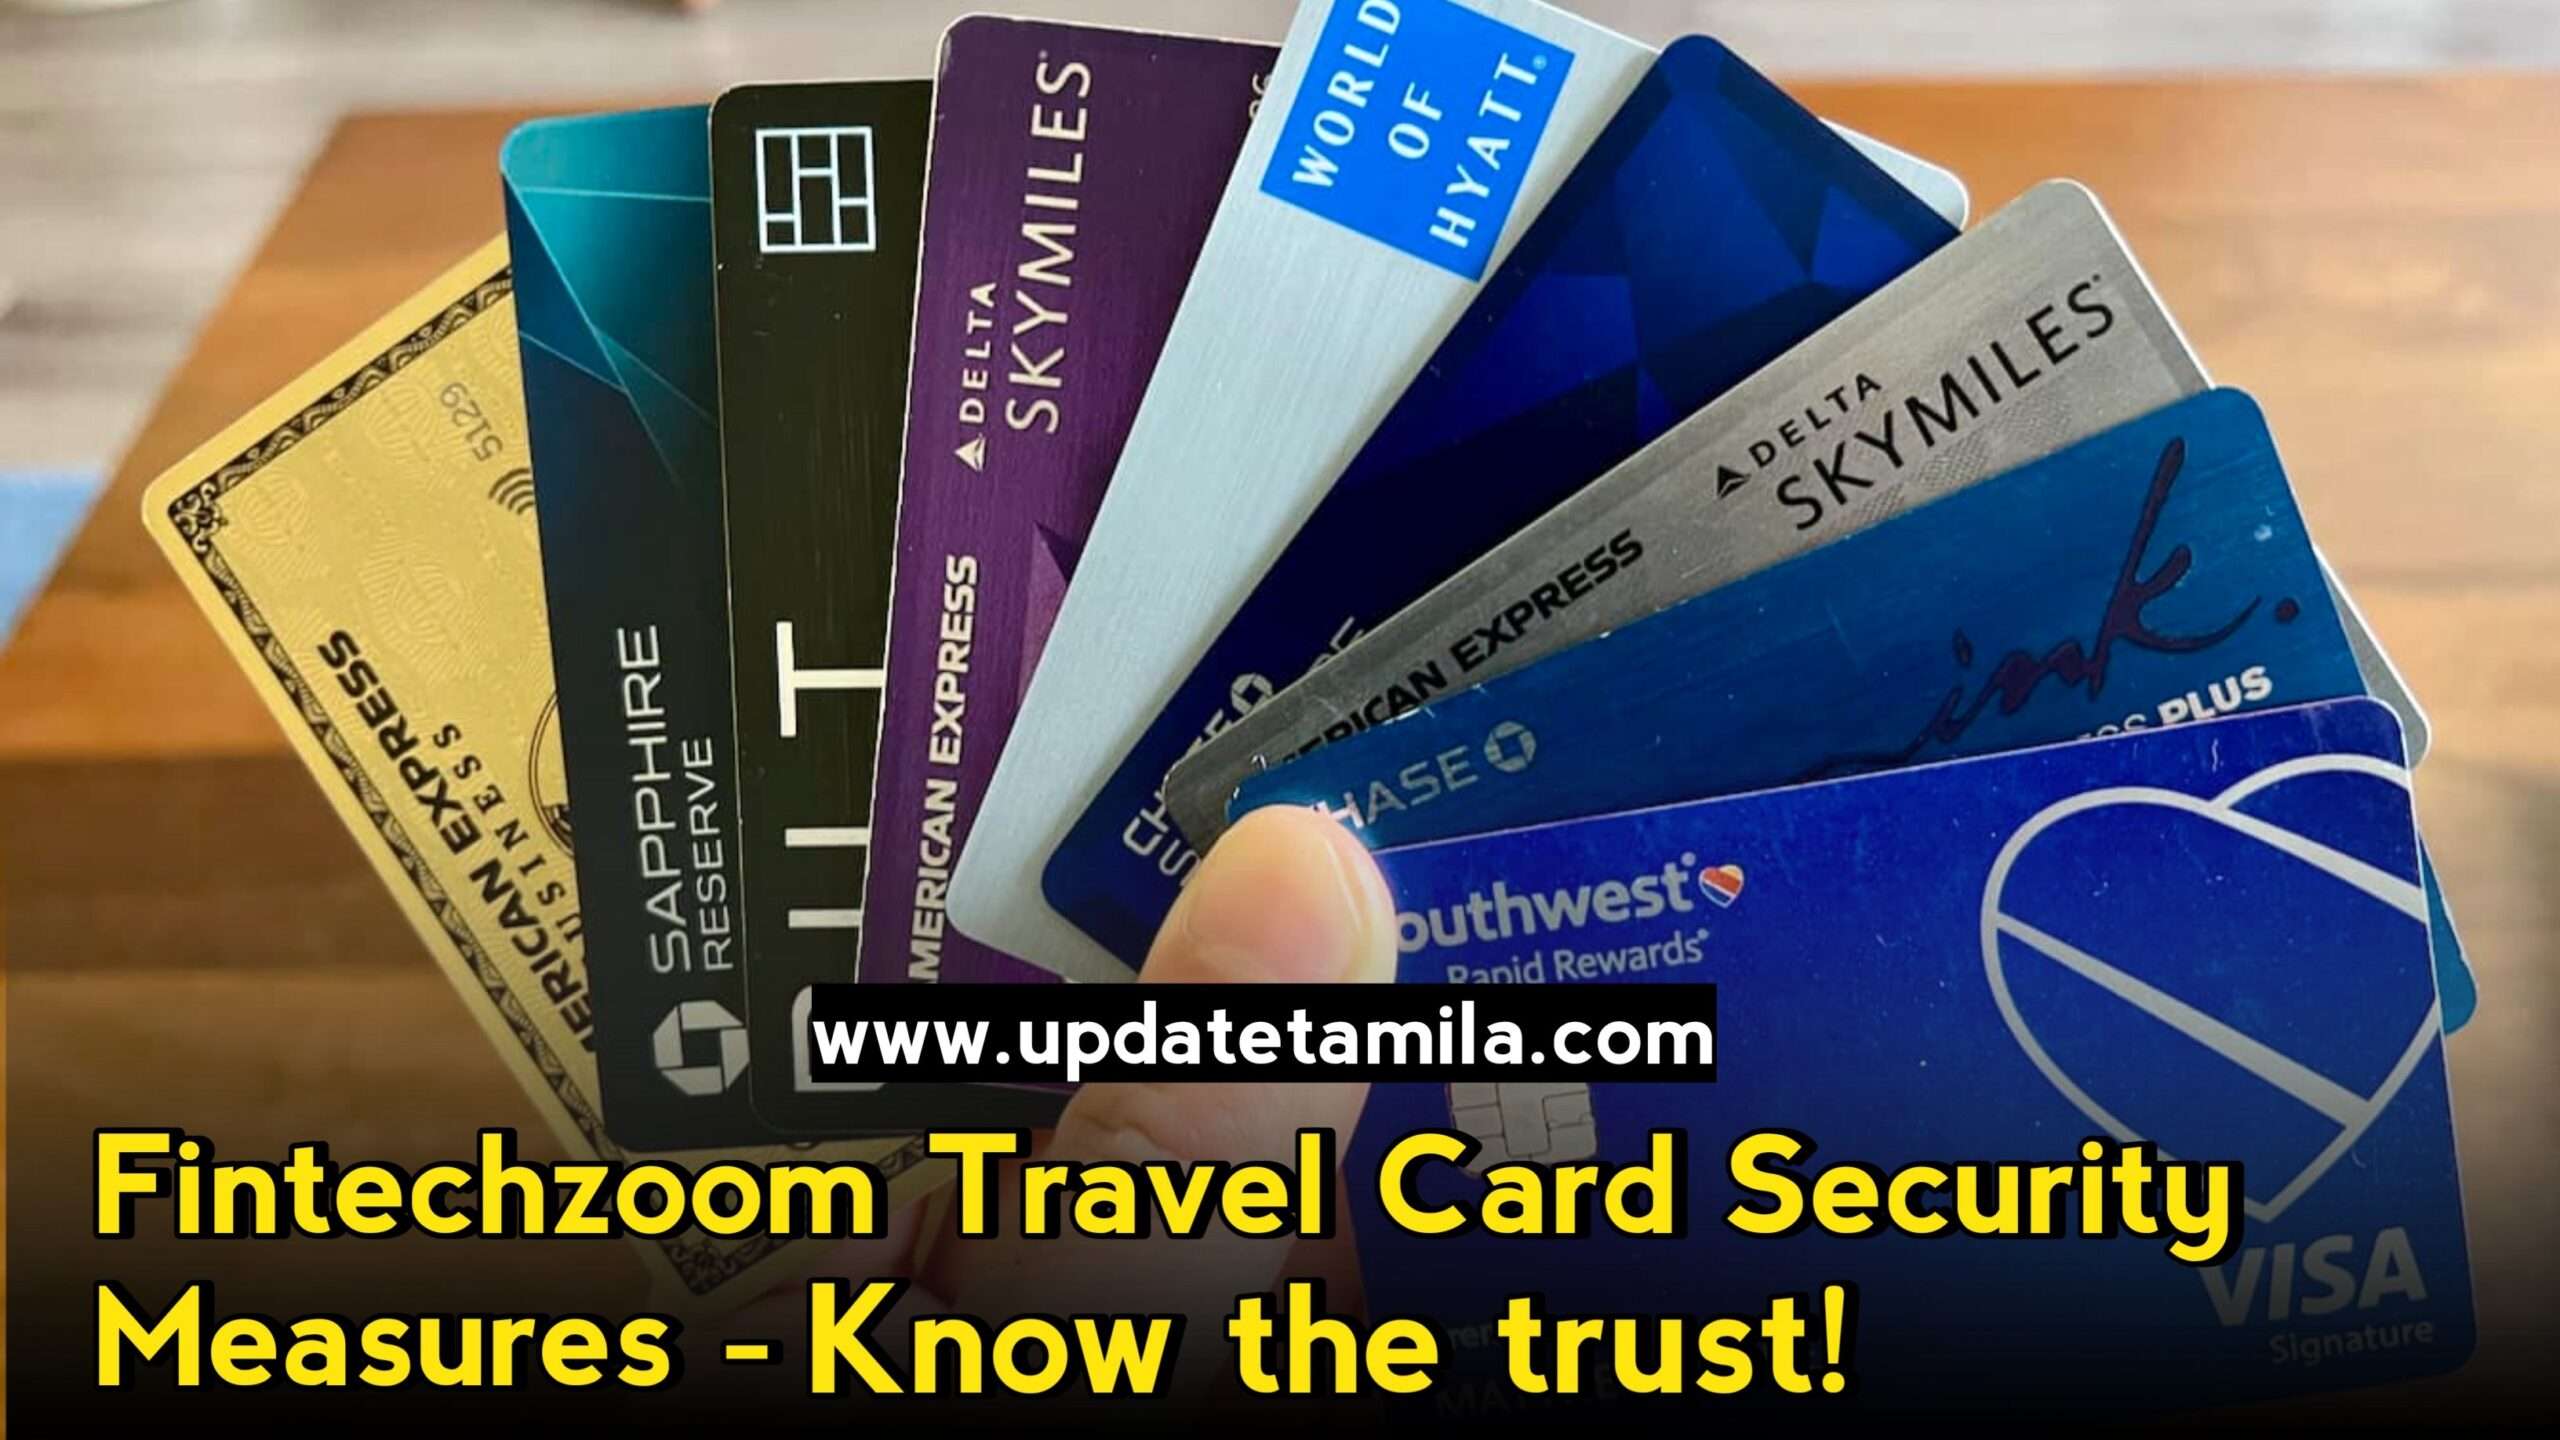 FintechZoom Best Travel Card Security Measures - Know the Trust!